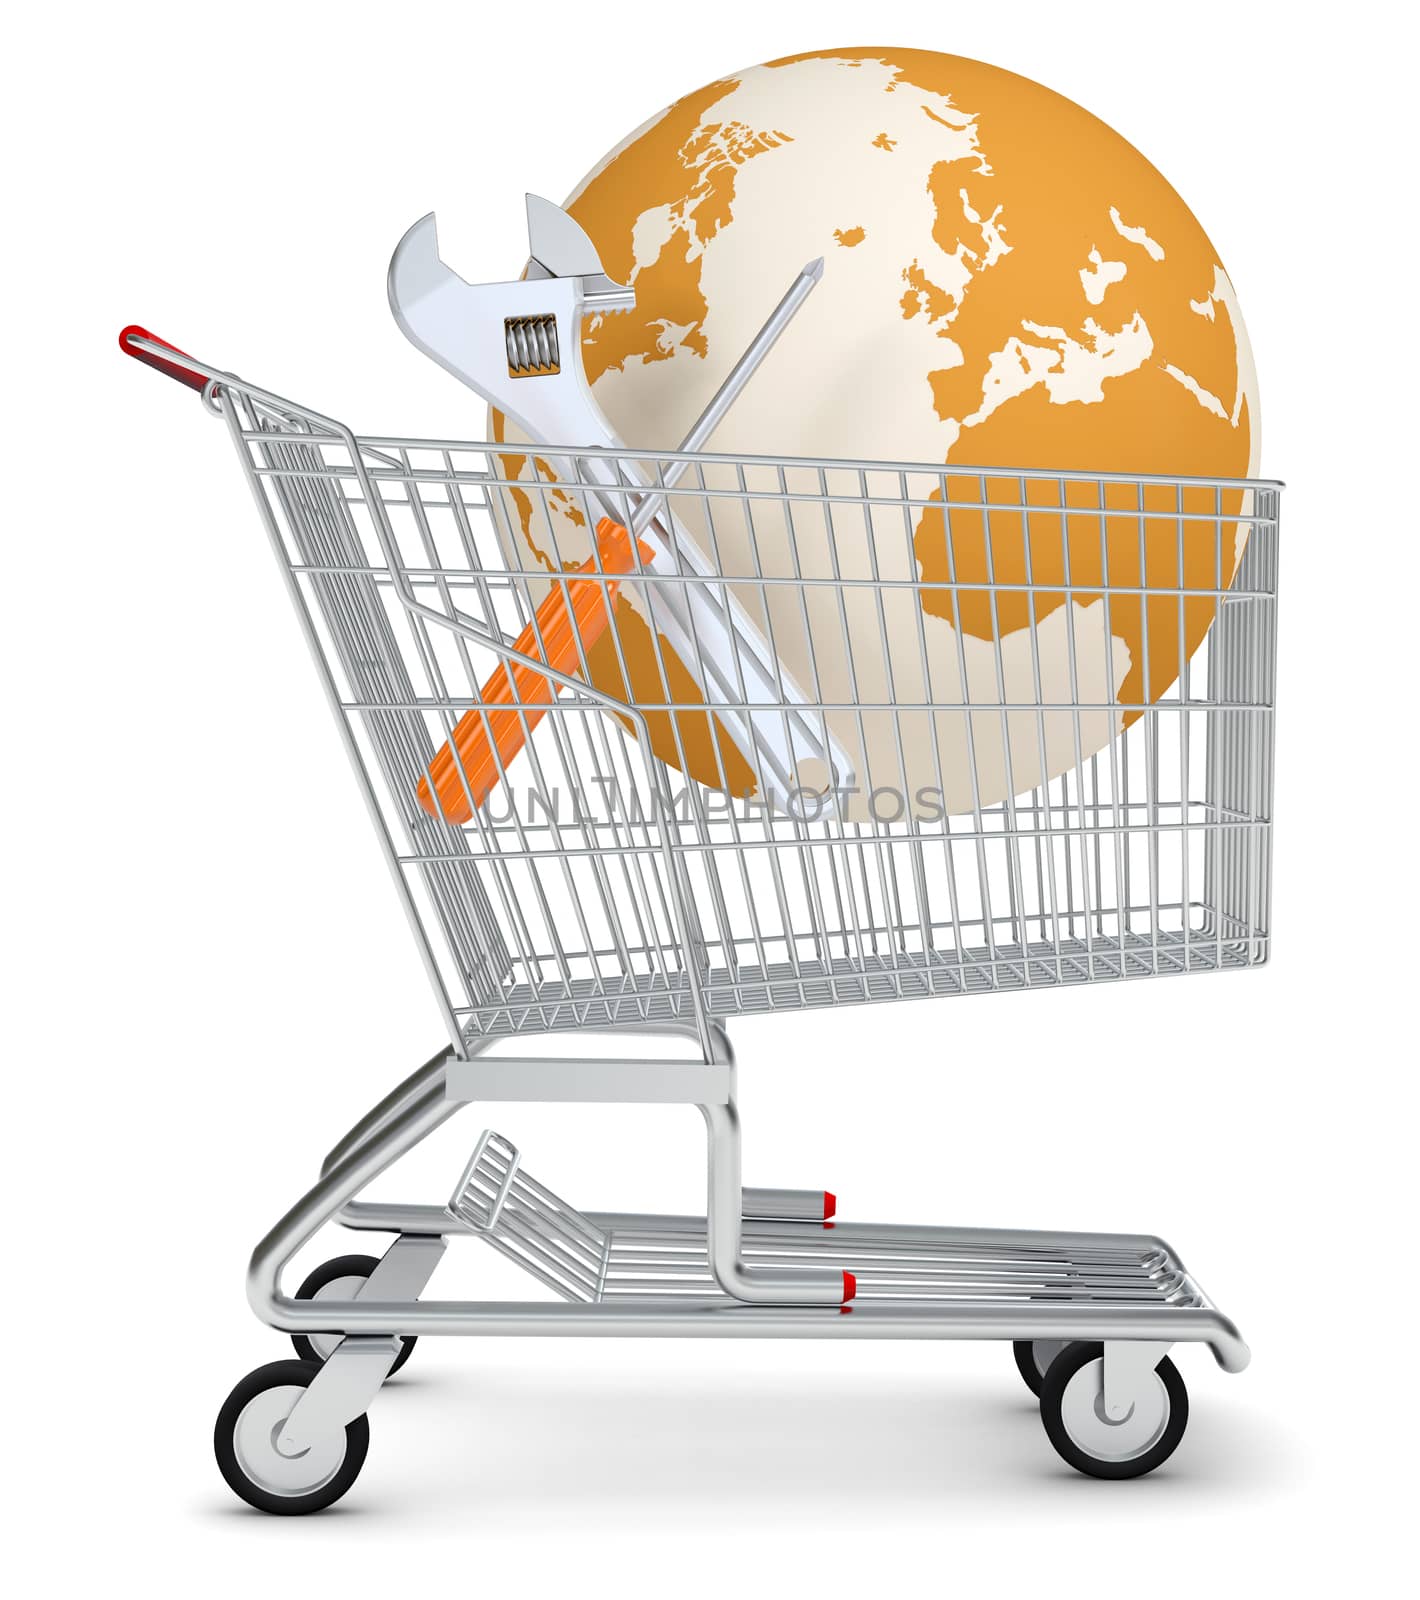 Earth and tools in shopping cart by cherezoff